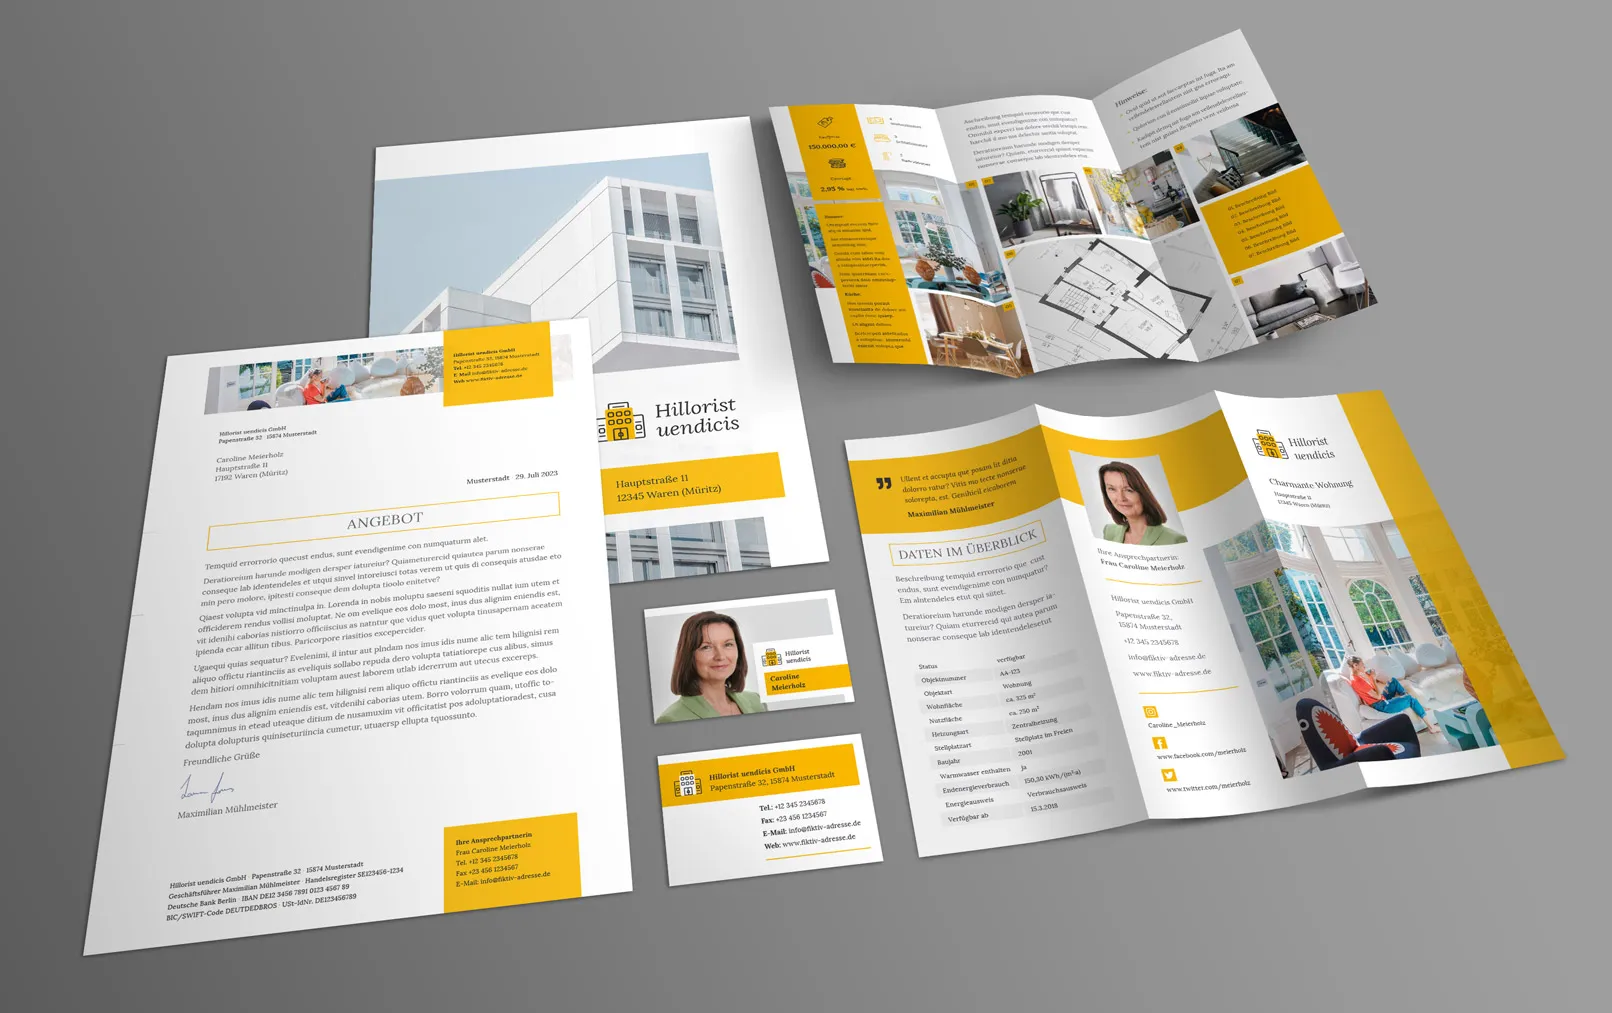 Corporate design templates for real estate marketing: stationery, flyers, business cards